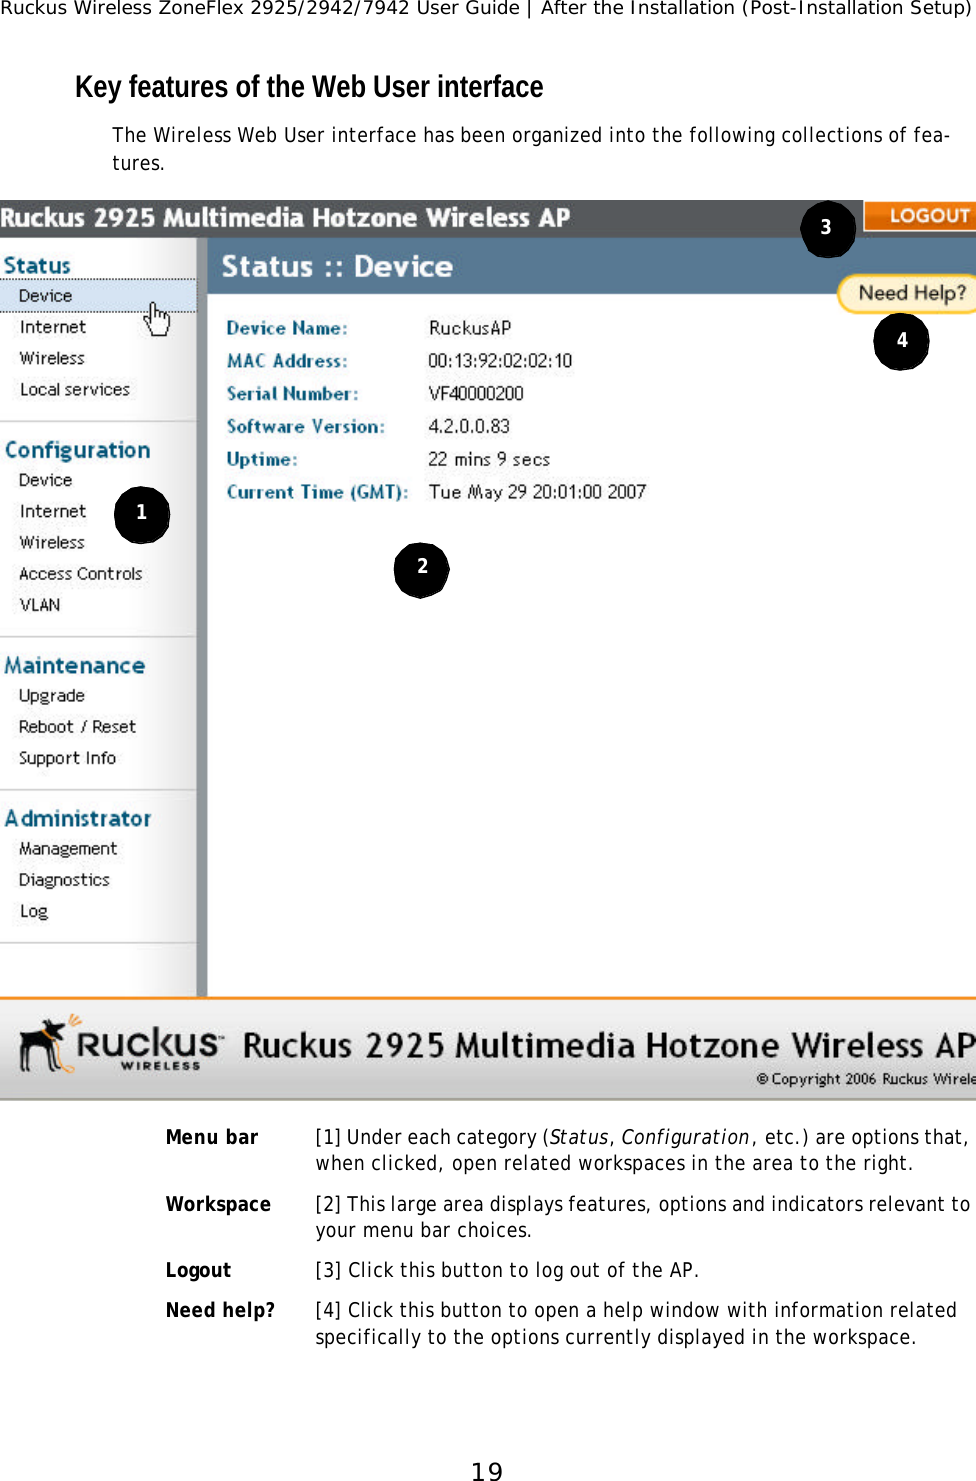 Ruckus Wireless ZoneFlex 2925/2942/7942 User Guide | After the Installation (Post-Installation Setup)19Key features of the Web User interfaceThe Wireless Web User interface has been organized into the following collections of fea-tures.Menu bar [1] Under each category (Status, Configuration, etc.) are options that, when clicked, open related workspaces in the area to the right.Workspace [2] This large area displays features, options and indicators relevant to your menu bar choices.Logout [3] Click this button to log out of the AP.Need help? [4] Click this button to open a help window with information related specifically to the options currently displayed in the workspace.1234